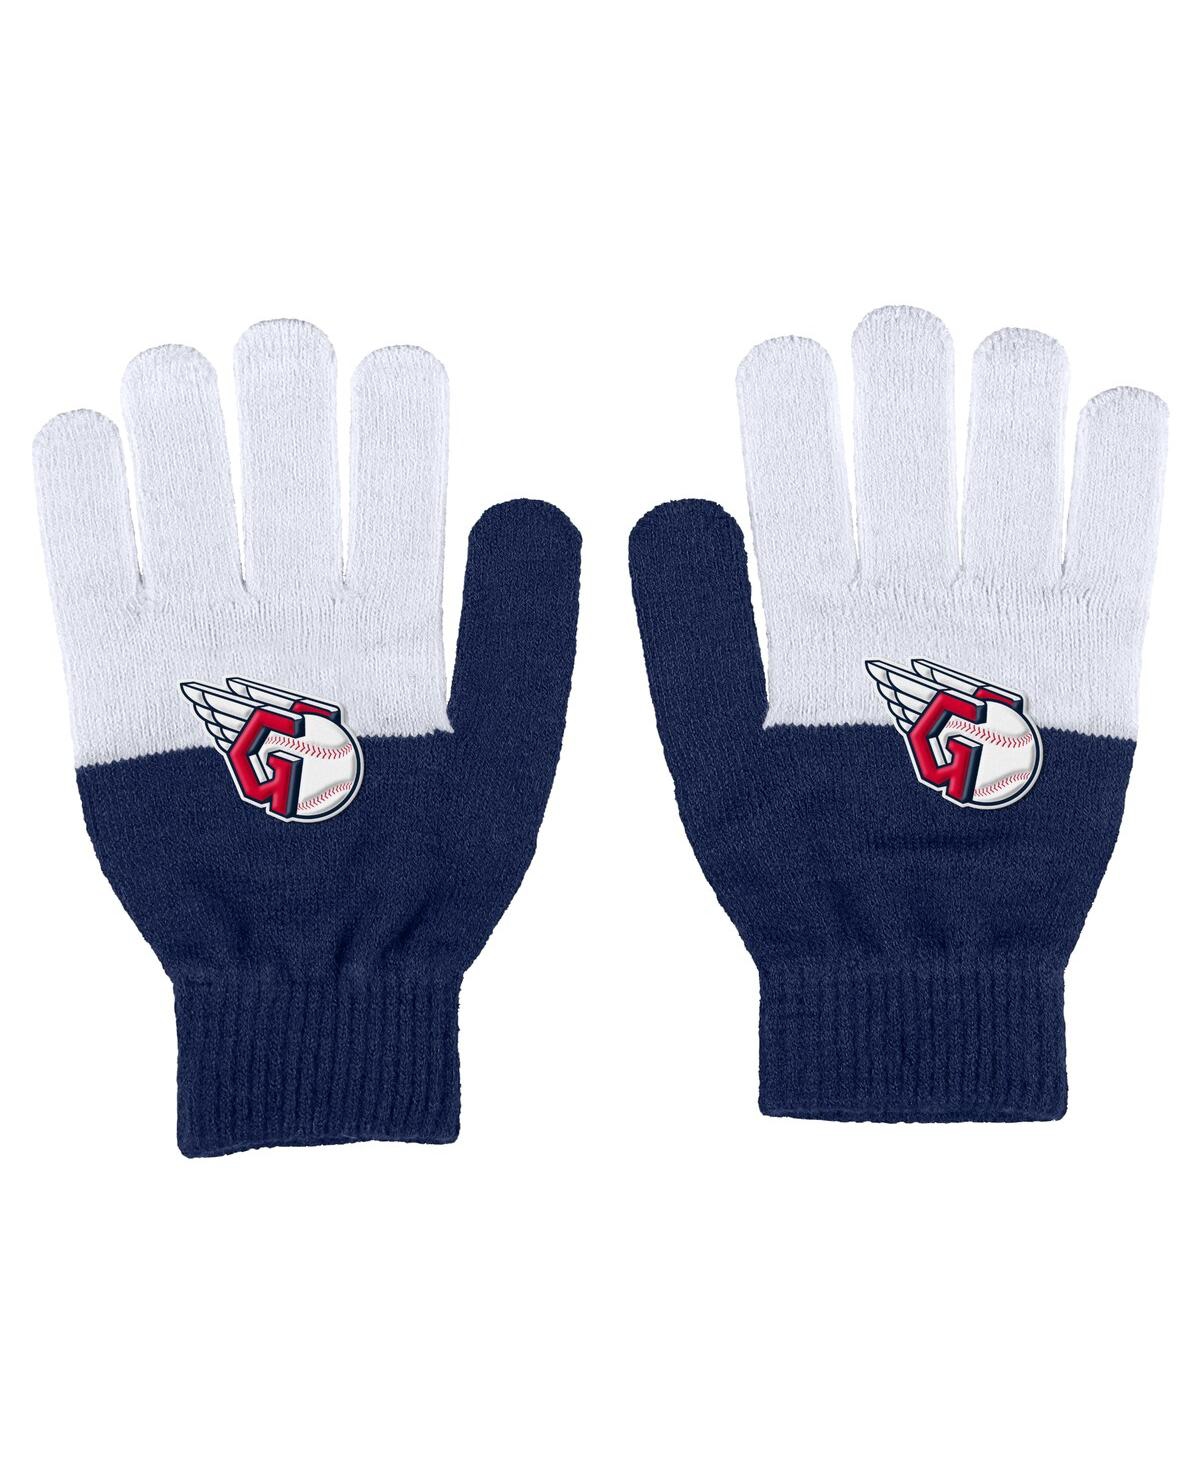 Women's Wear by Erin Andrews Cleveland Guardians Color-Block Gloves - Navy, White